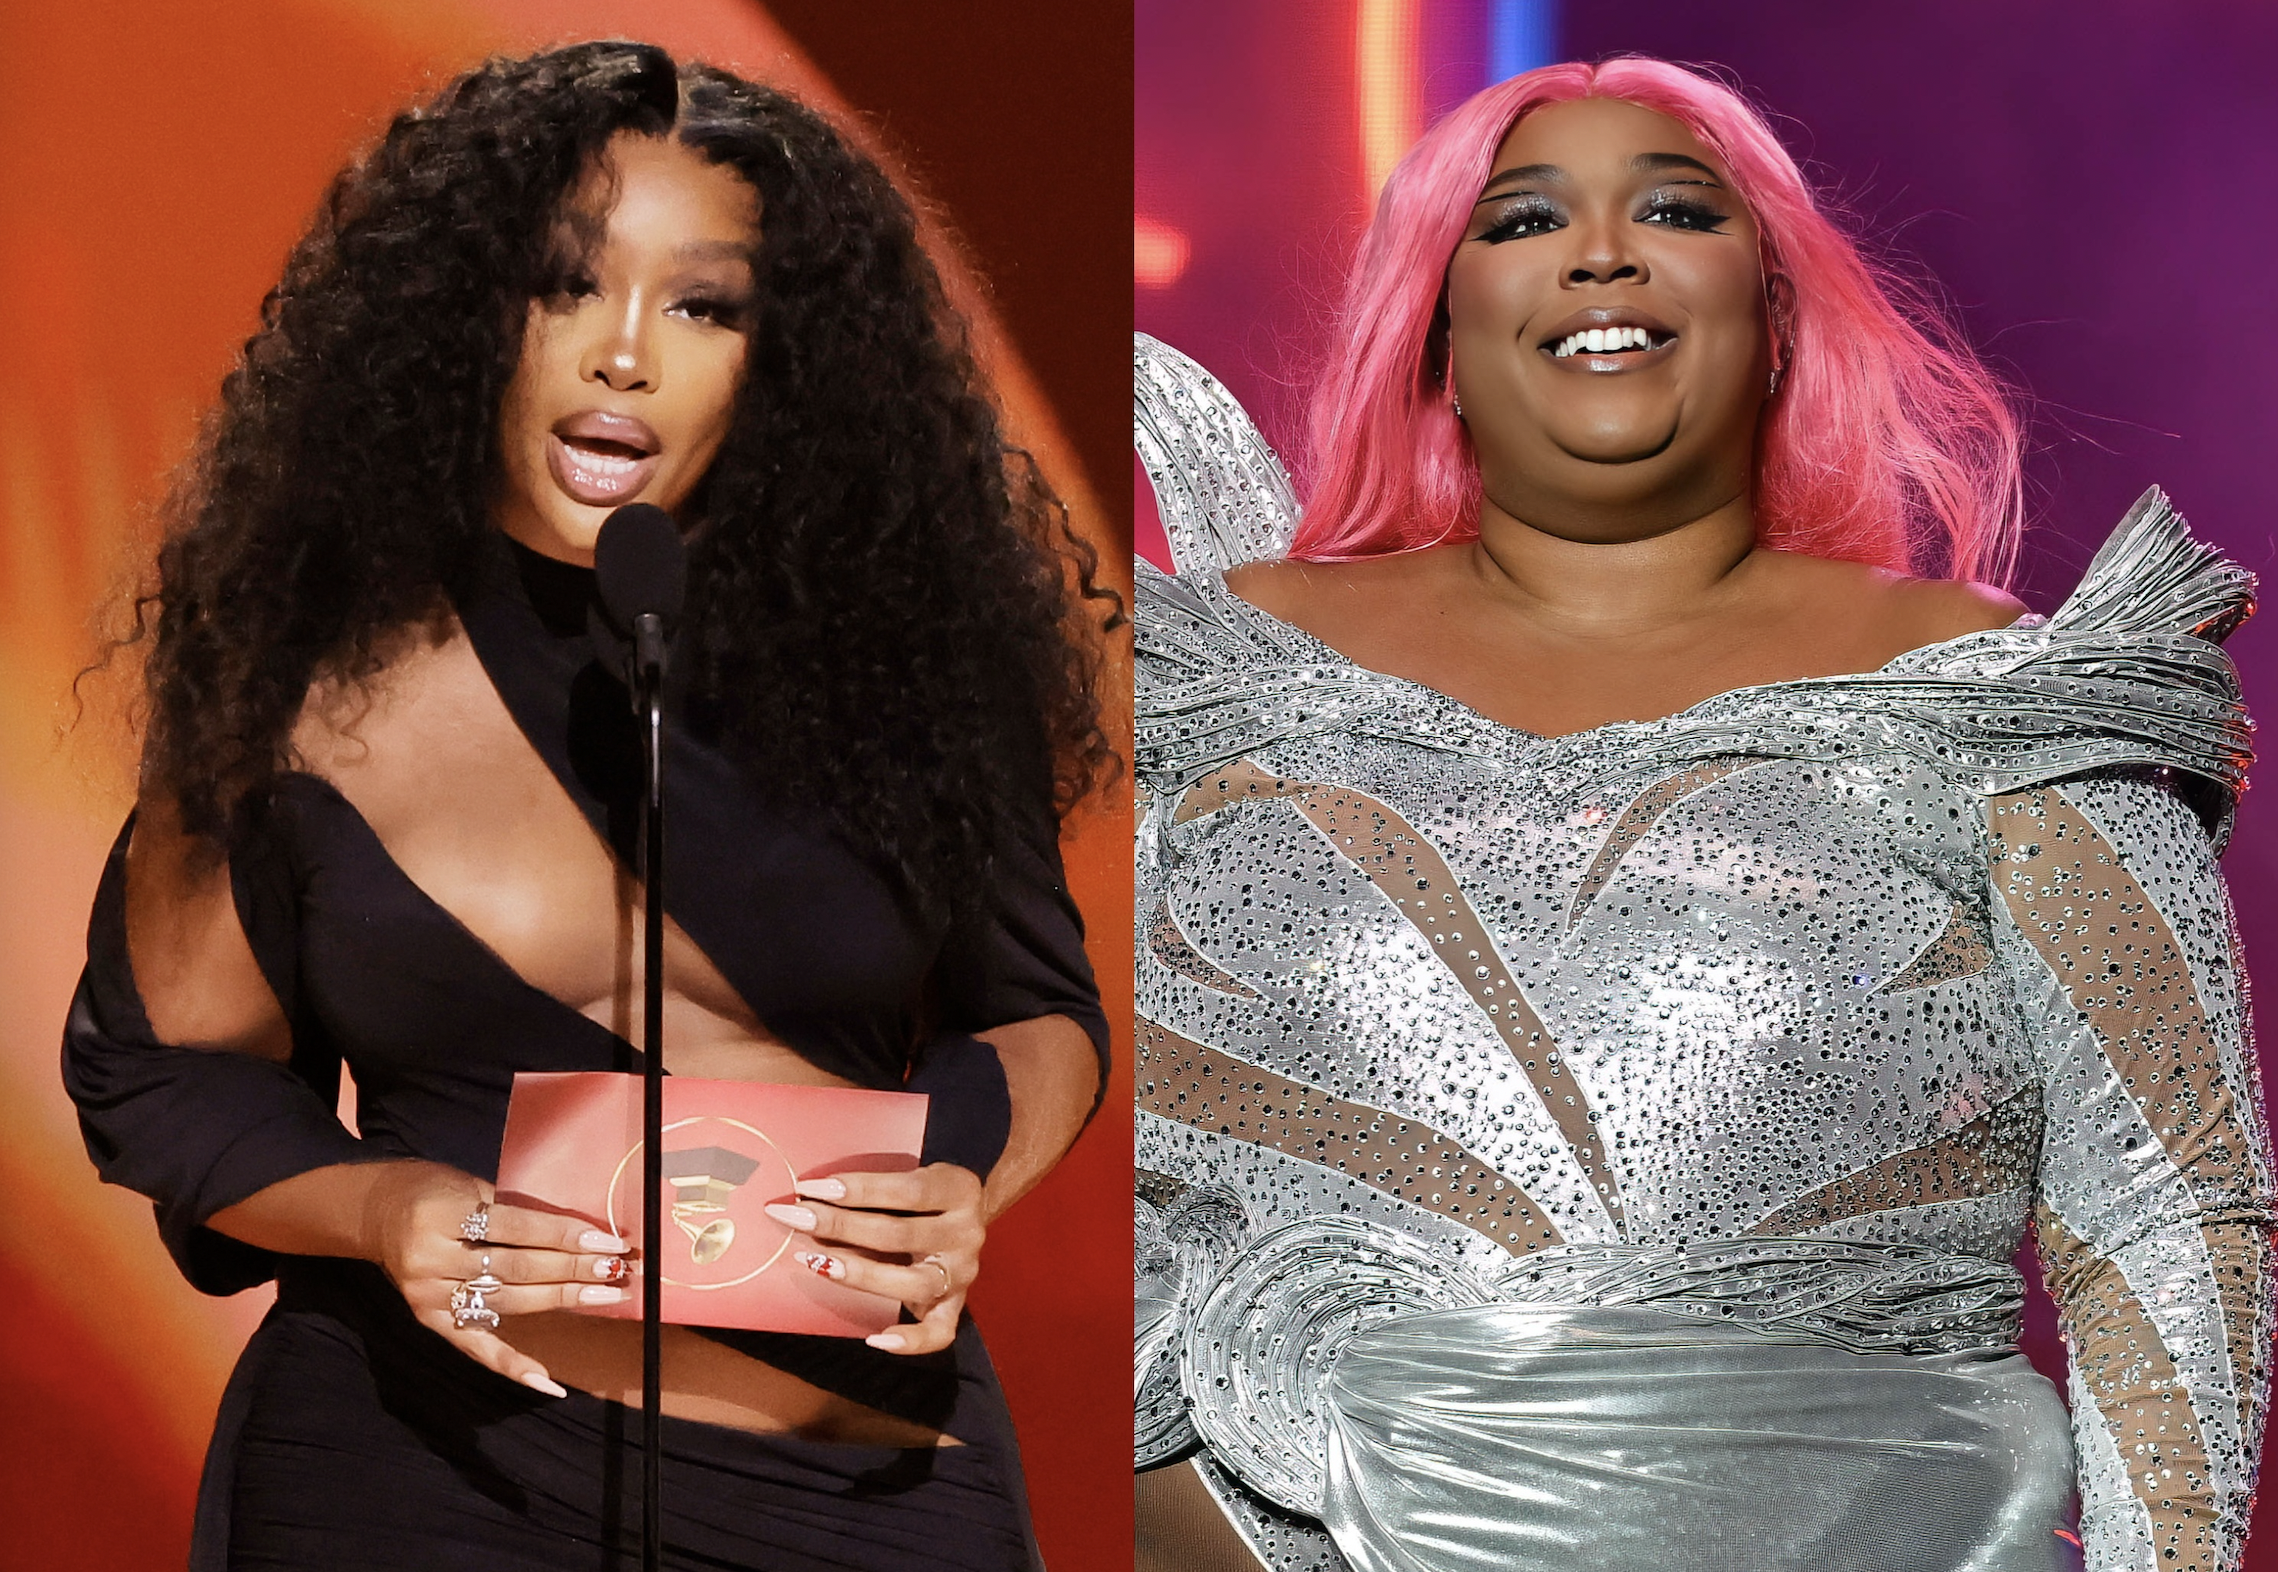 SZA Condemns Lizzo’s Twitter Bullies: “IT’S UGLY OUTSIDE ALREADY. Why Add?”